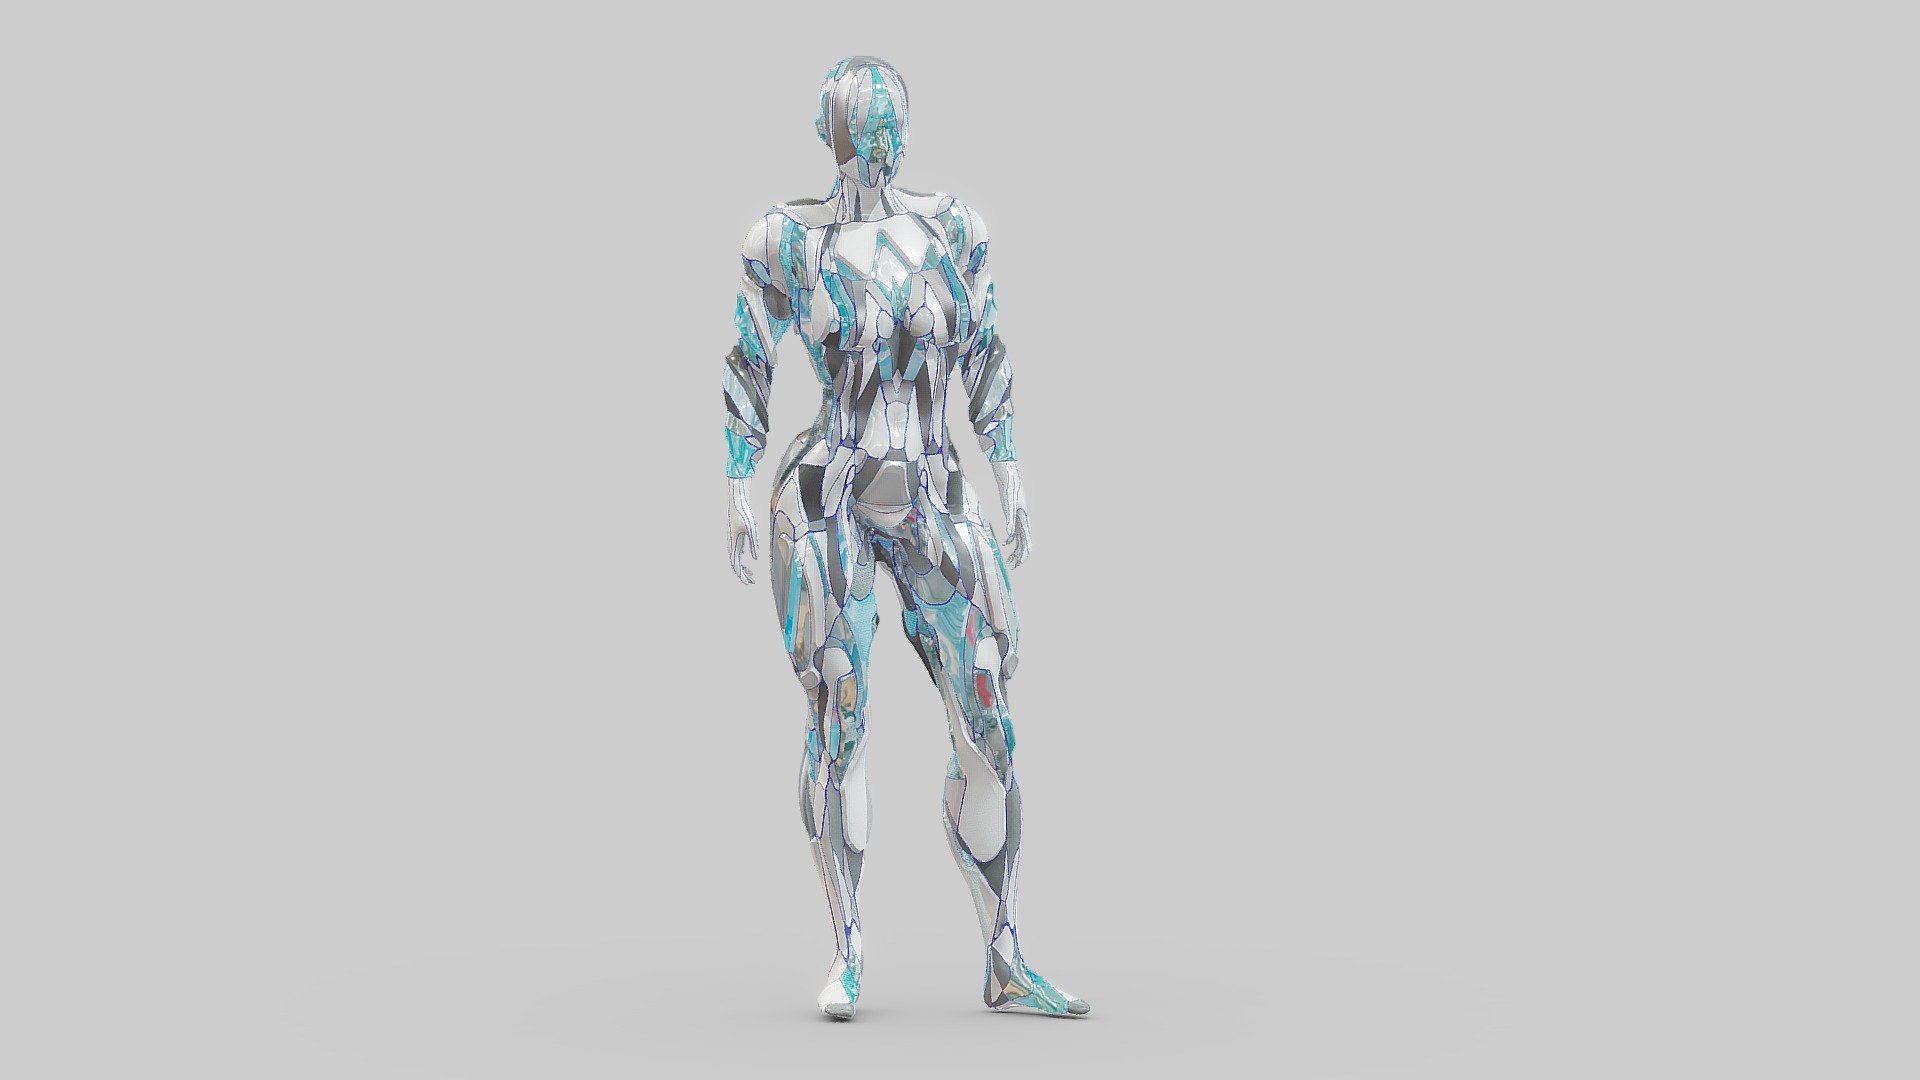 Procedural character design with houdini. The panel is generated based on chebyshev noise. Do you like this self-organized shape? - Biomechanic_design_2023.8.29_stand01 - 3D model by lonlydrxx (@weiyiwang) 3d model